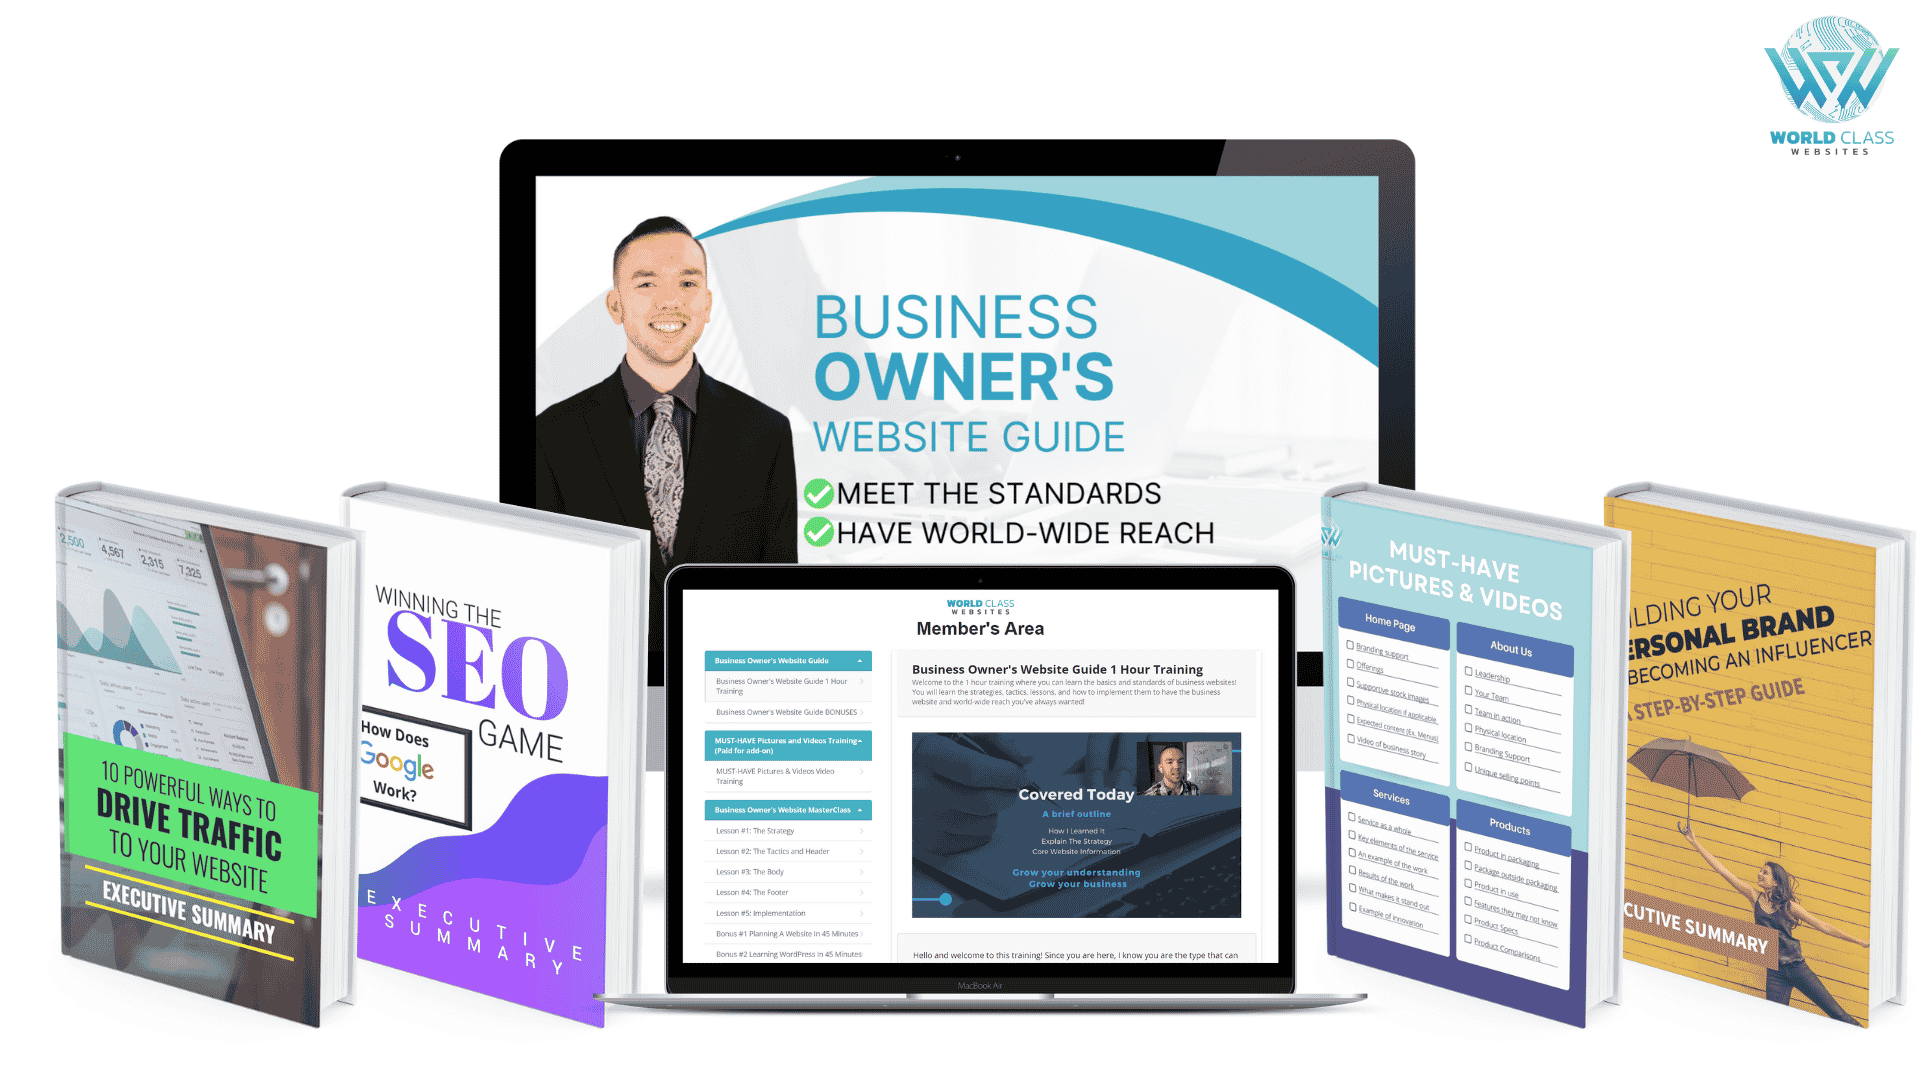 Business owners website guide and bonuseses on screen and book covers